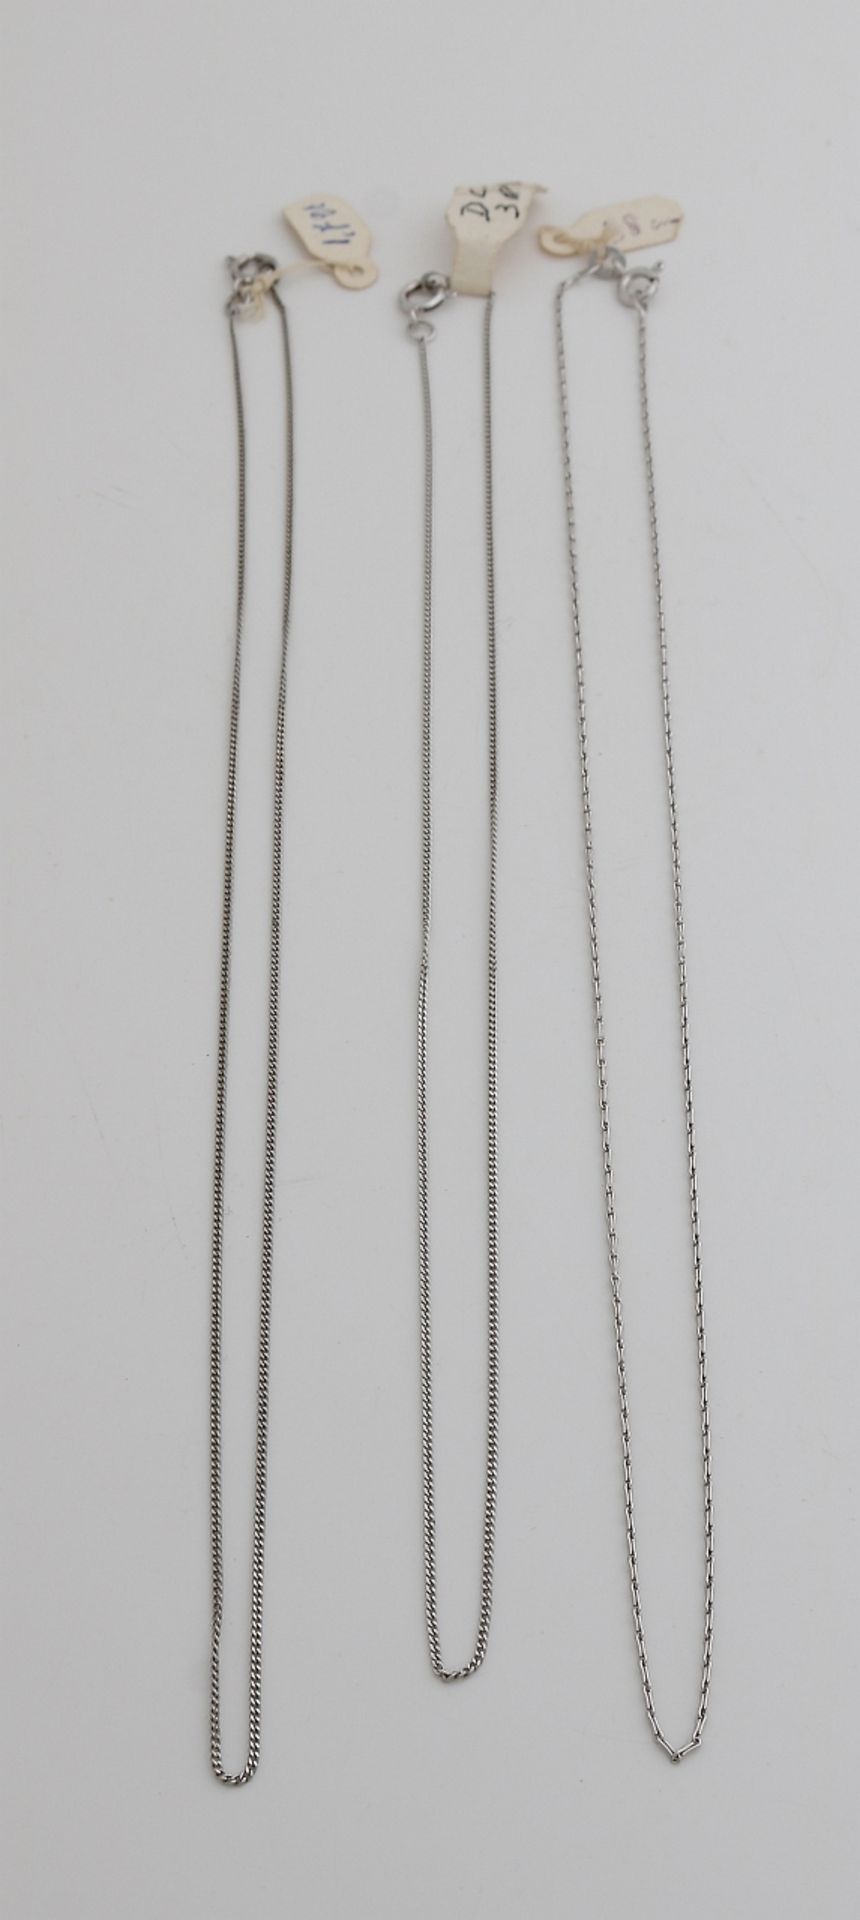 3 White gold necklaces